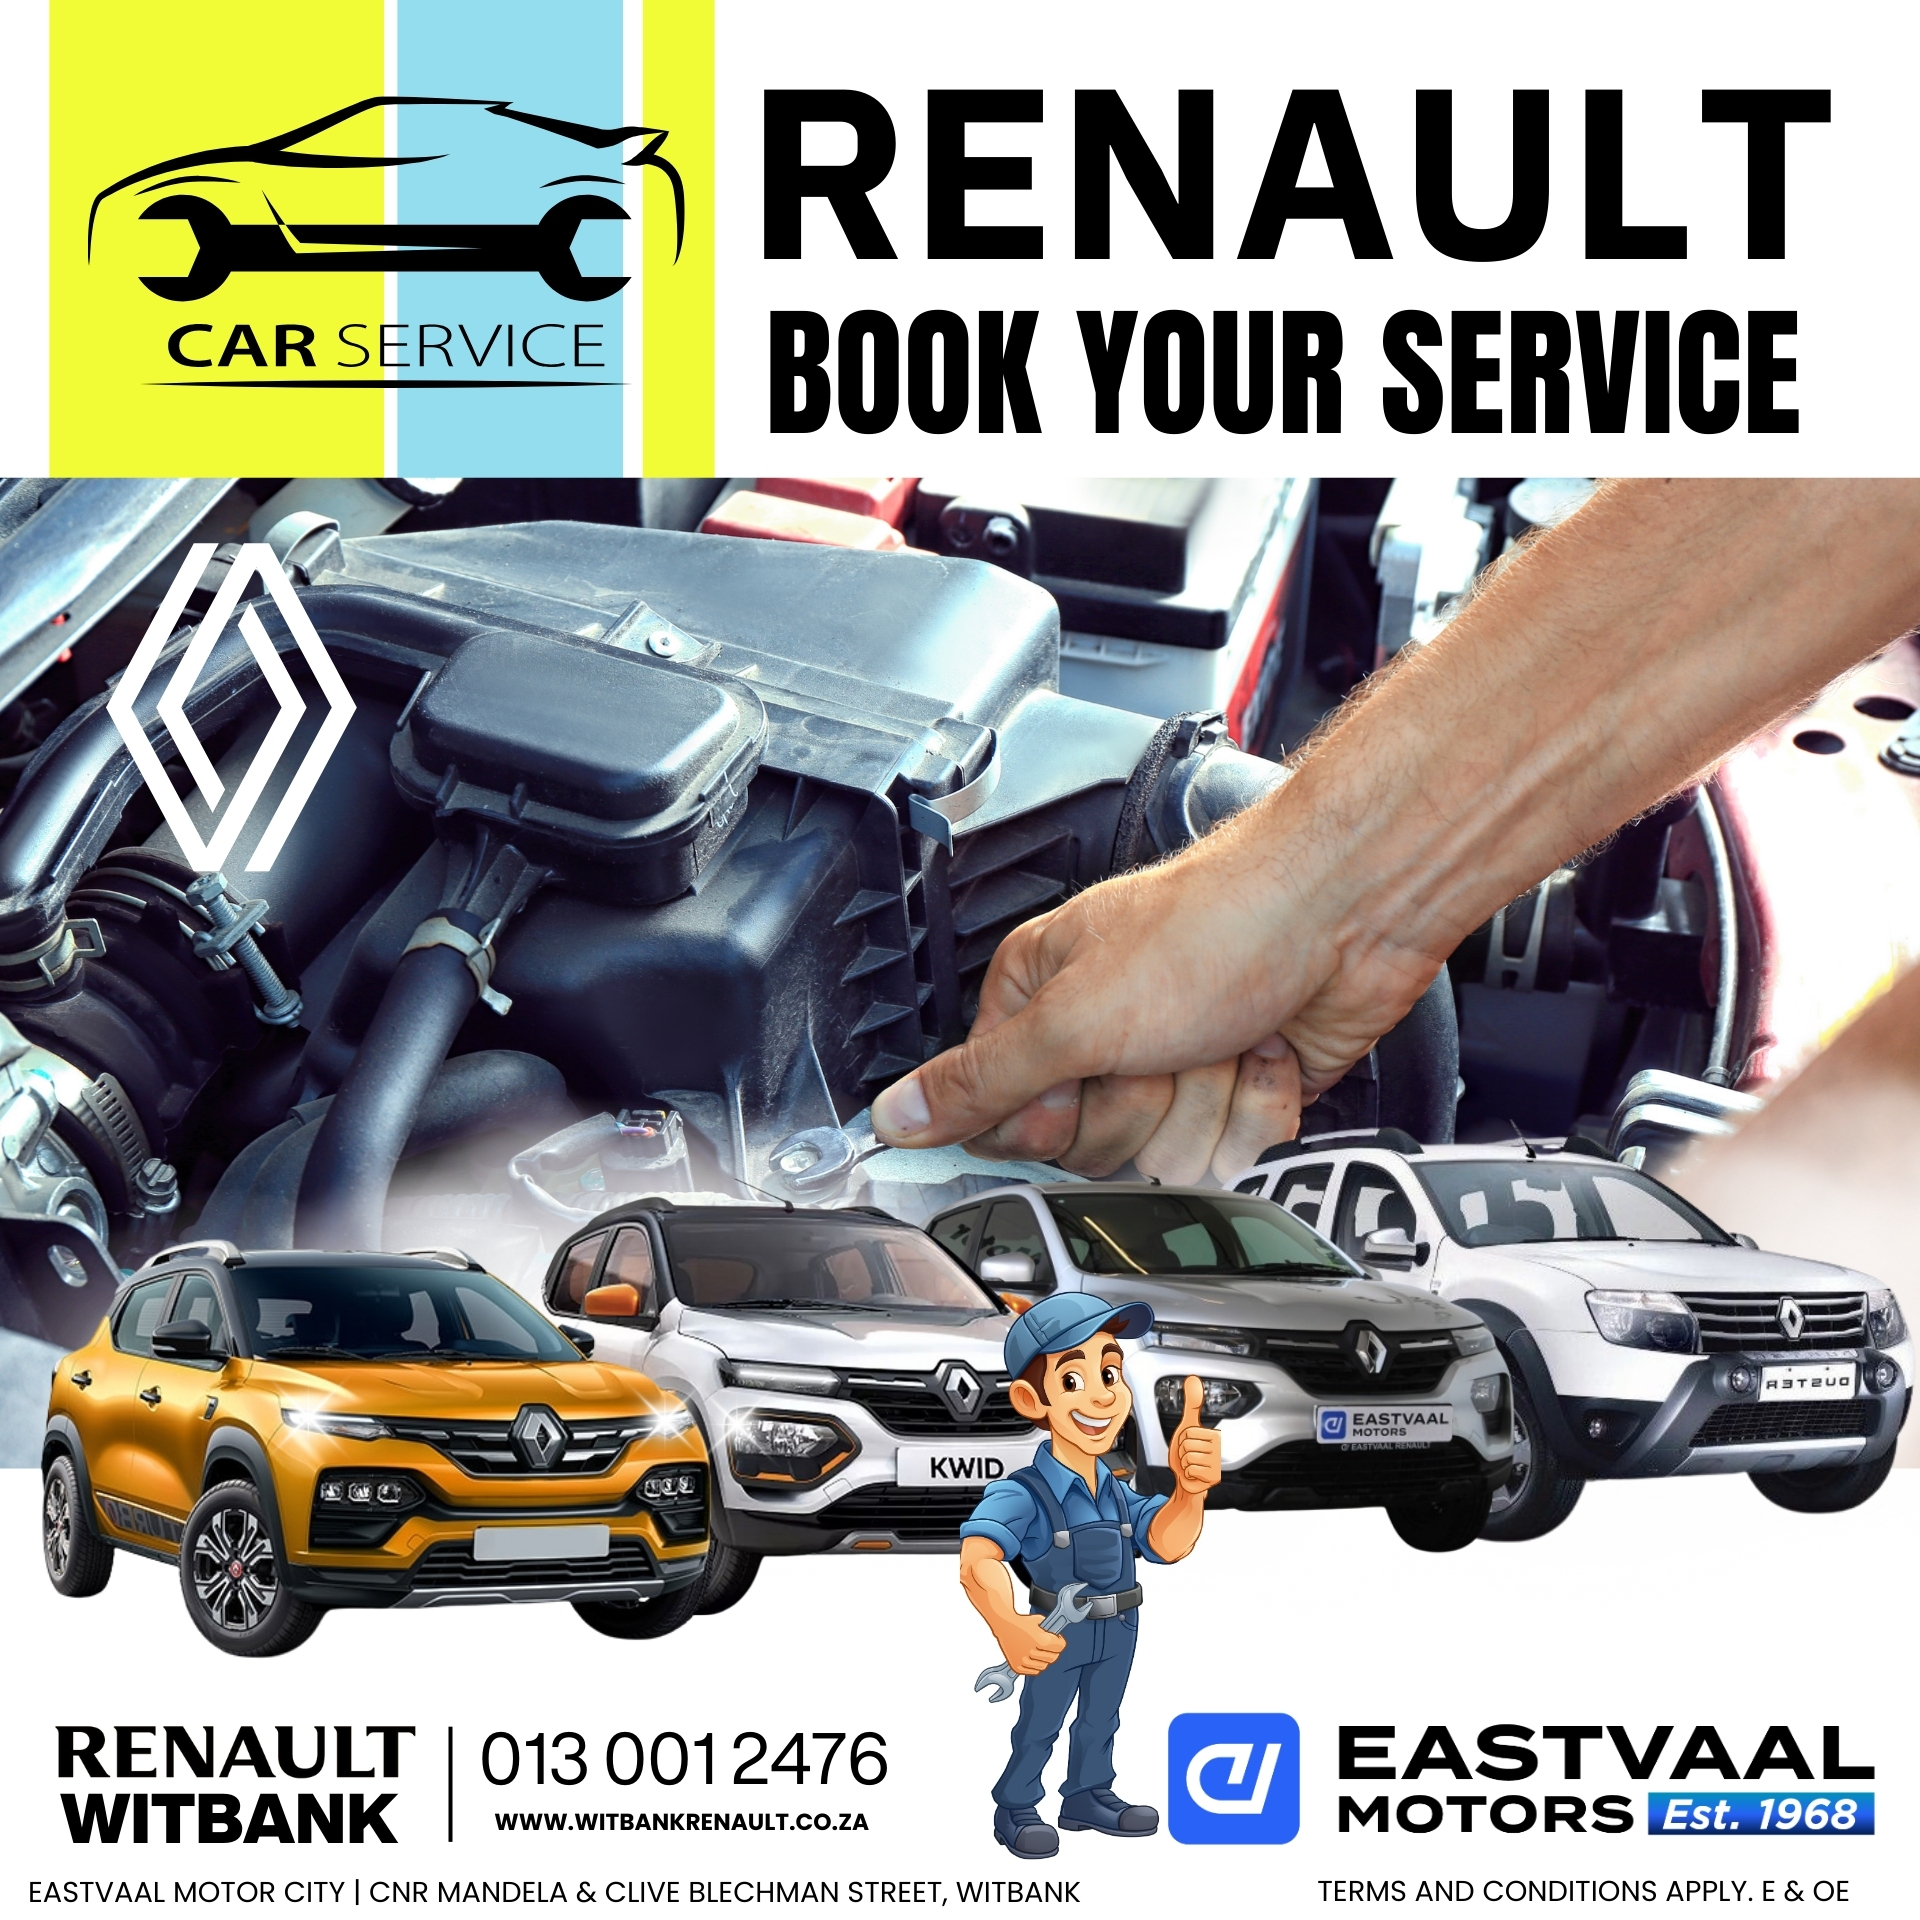 Stay safe on the road. Book your vehicle service today at Eastvaal Motor City! image from Eastvaal Motors